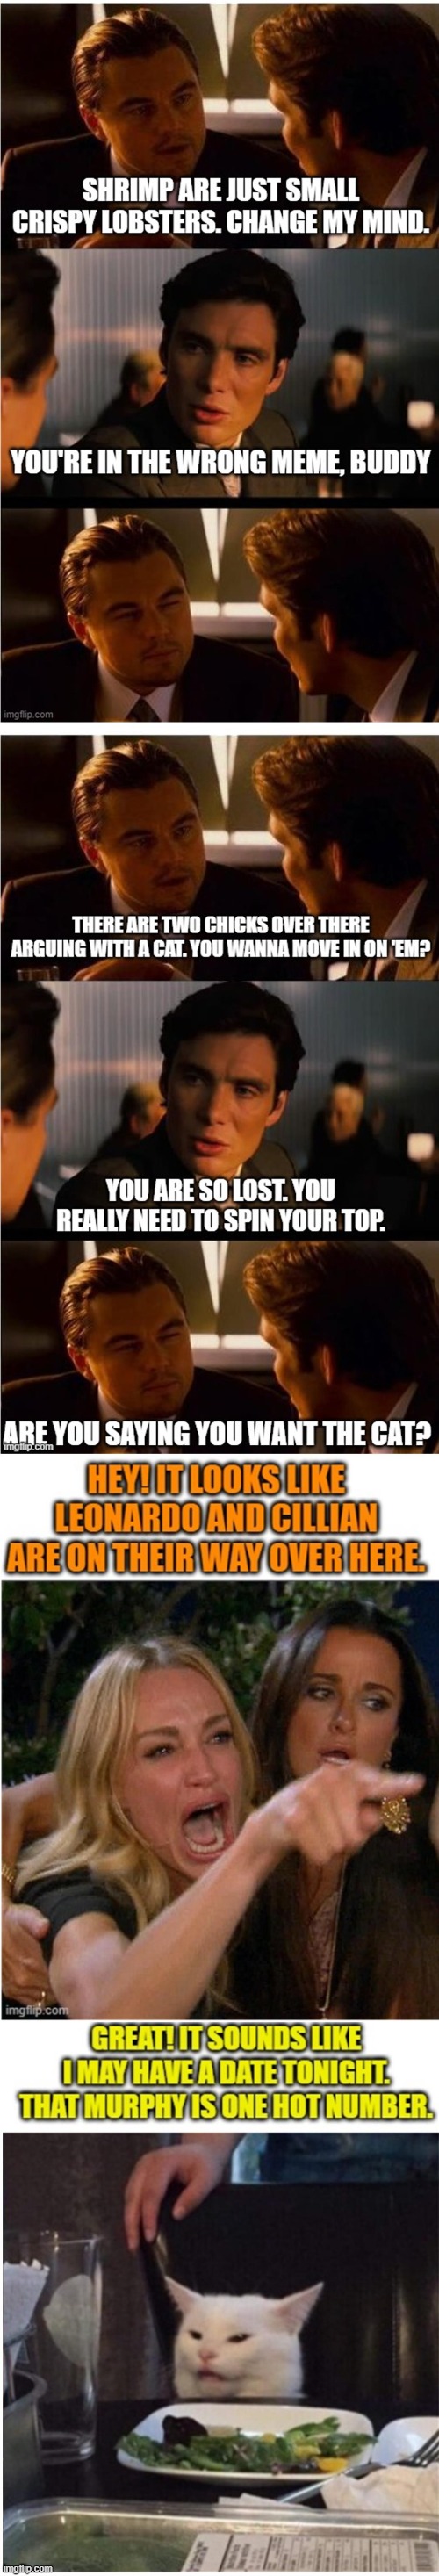 Inception Melodrama | image tagged in memes,inception,two women yelling at a cat | made w/ Imgflip meme maker